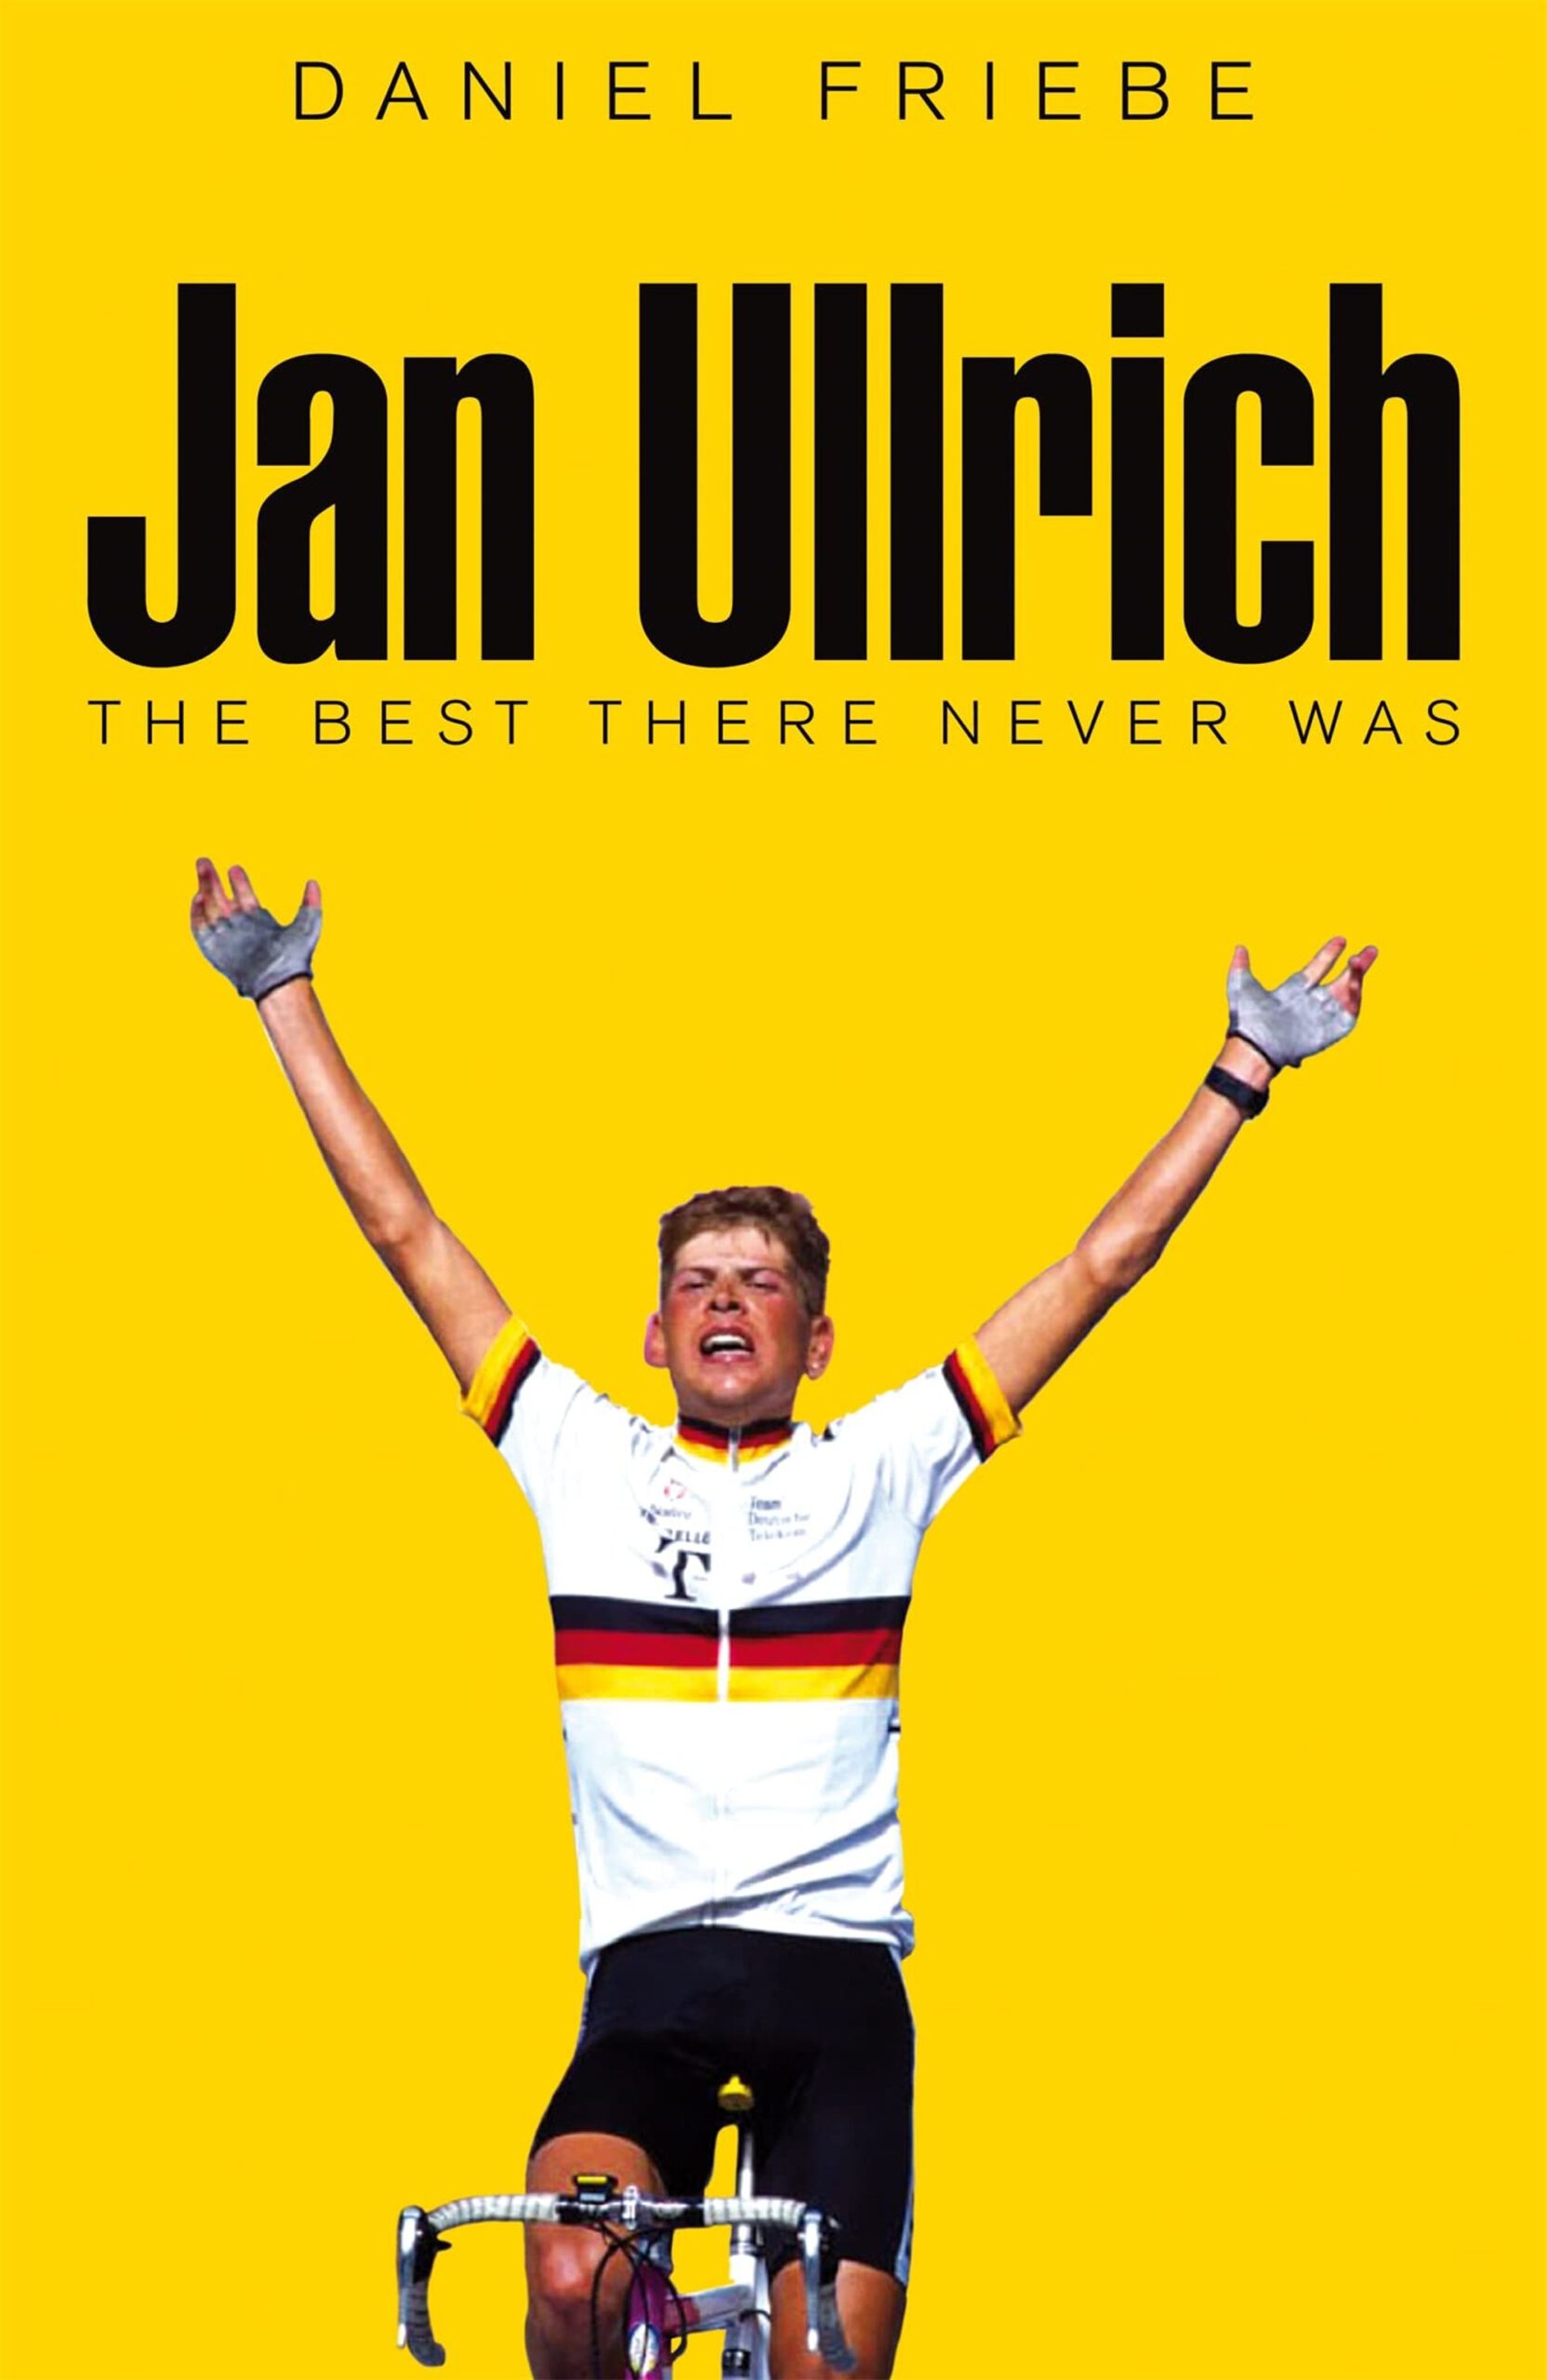 Daniel Friebe – Jan Ullrich. The Best There Never Was.